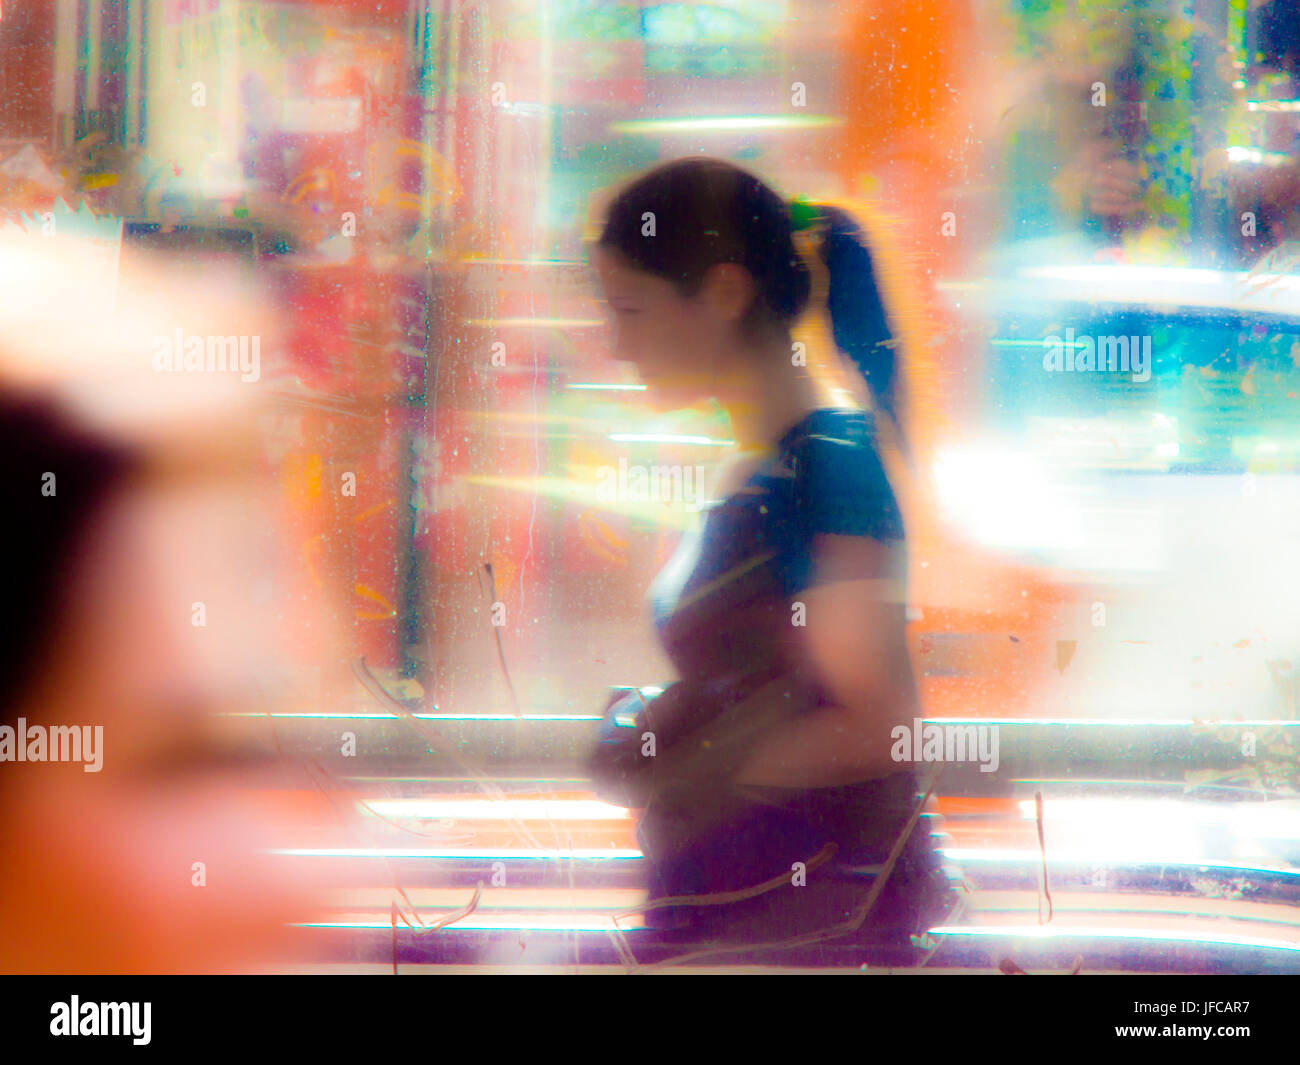 Blurry young woman on the city streets on a sunny day with vibrant colors, burning light and glass reflections Stock Photo